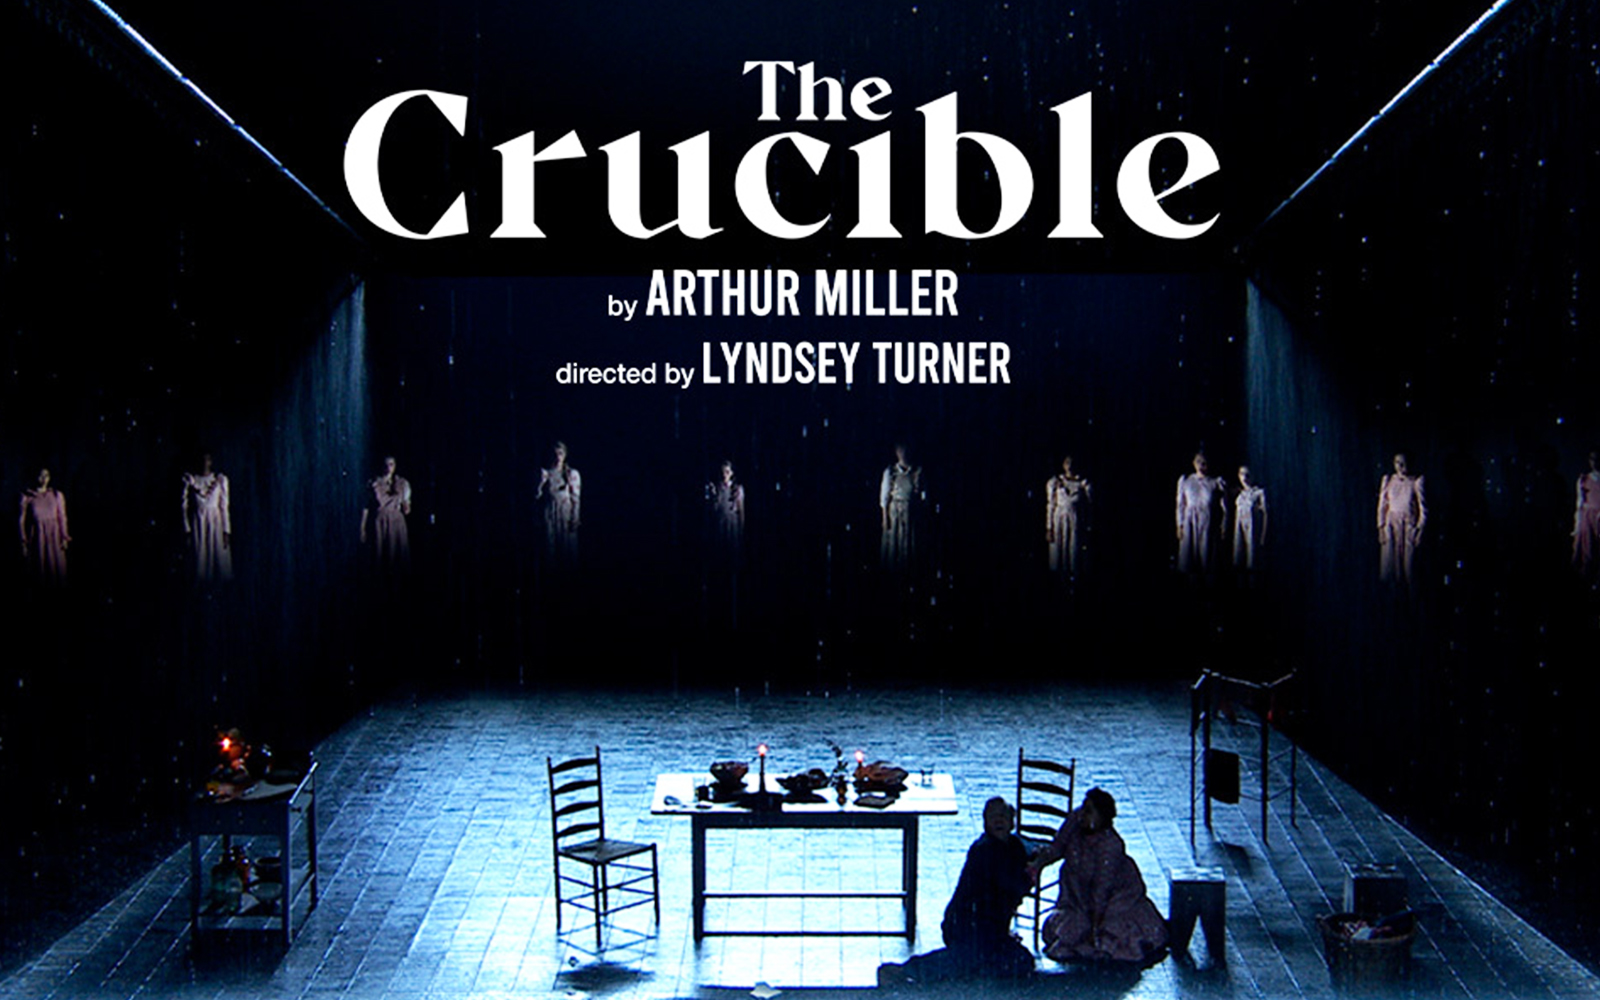 Image of The Crucible